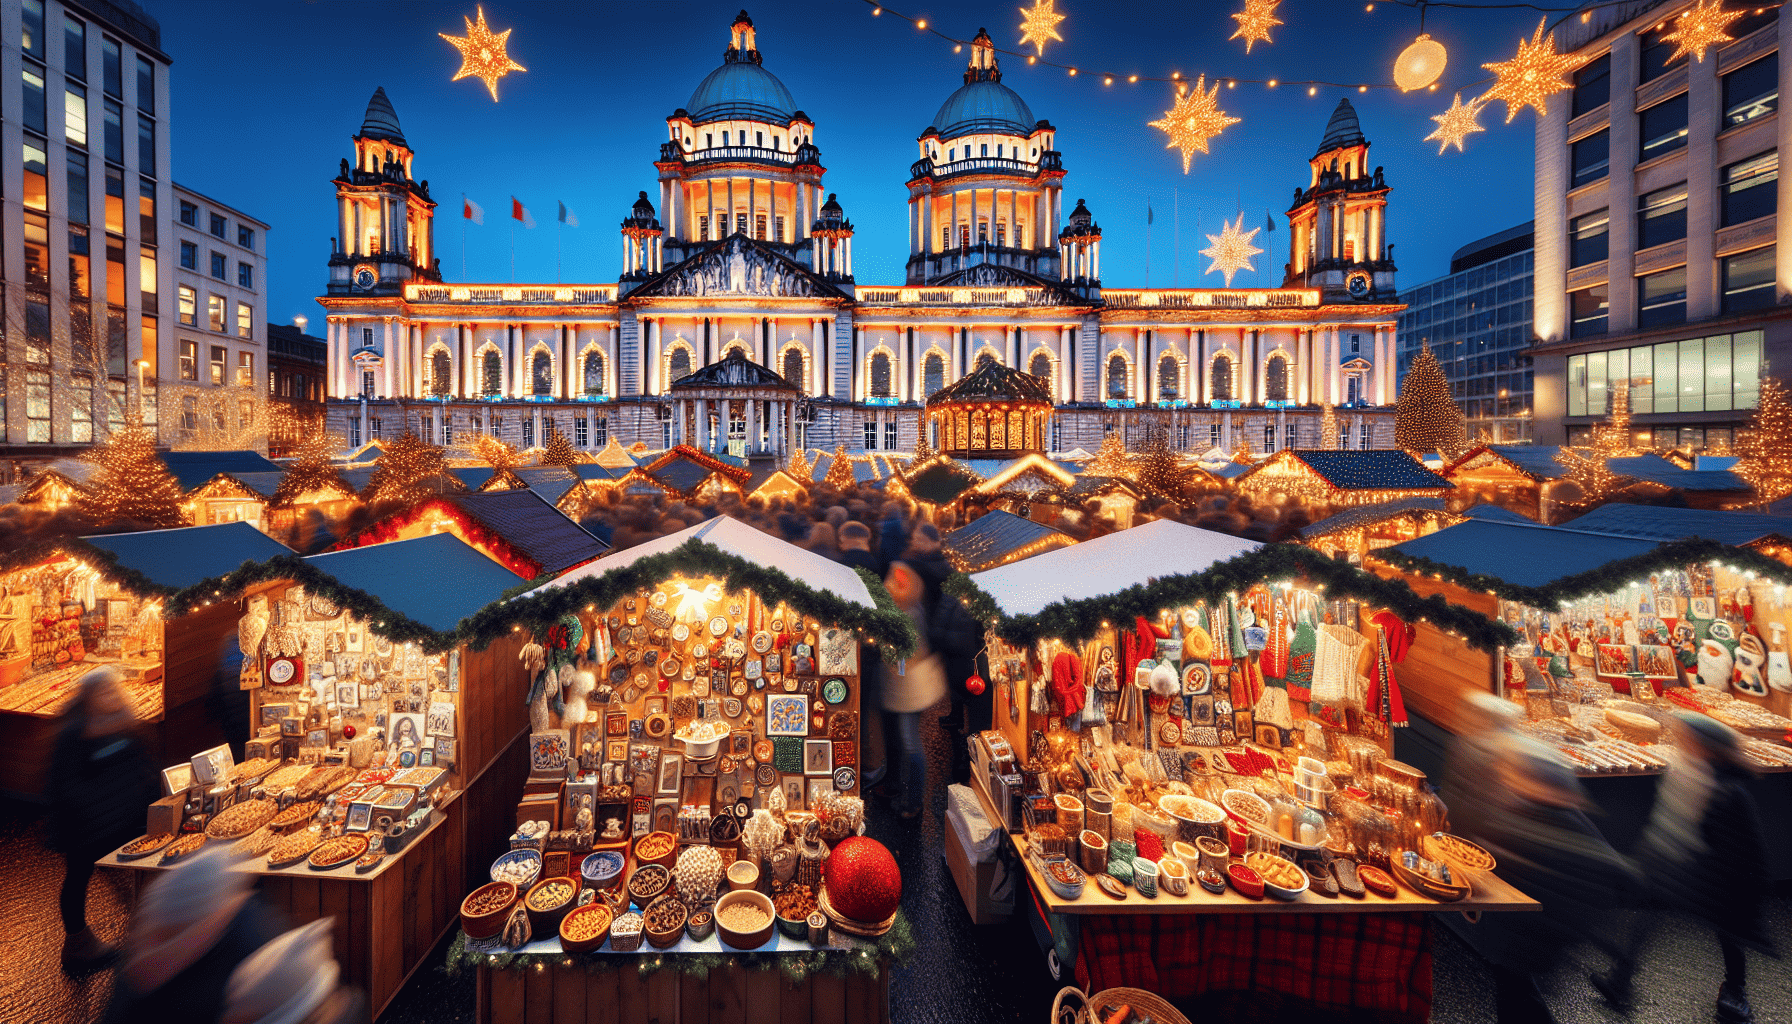 Belfast Christmas Market with a view of Belfast City Hall